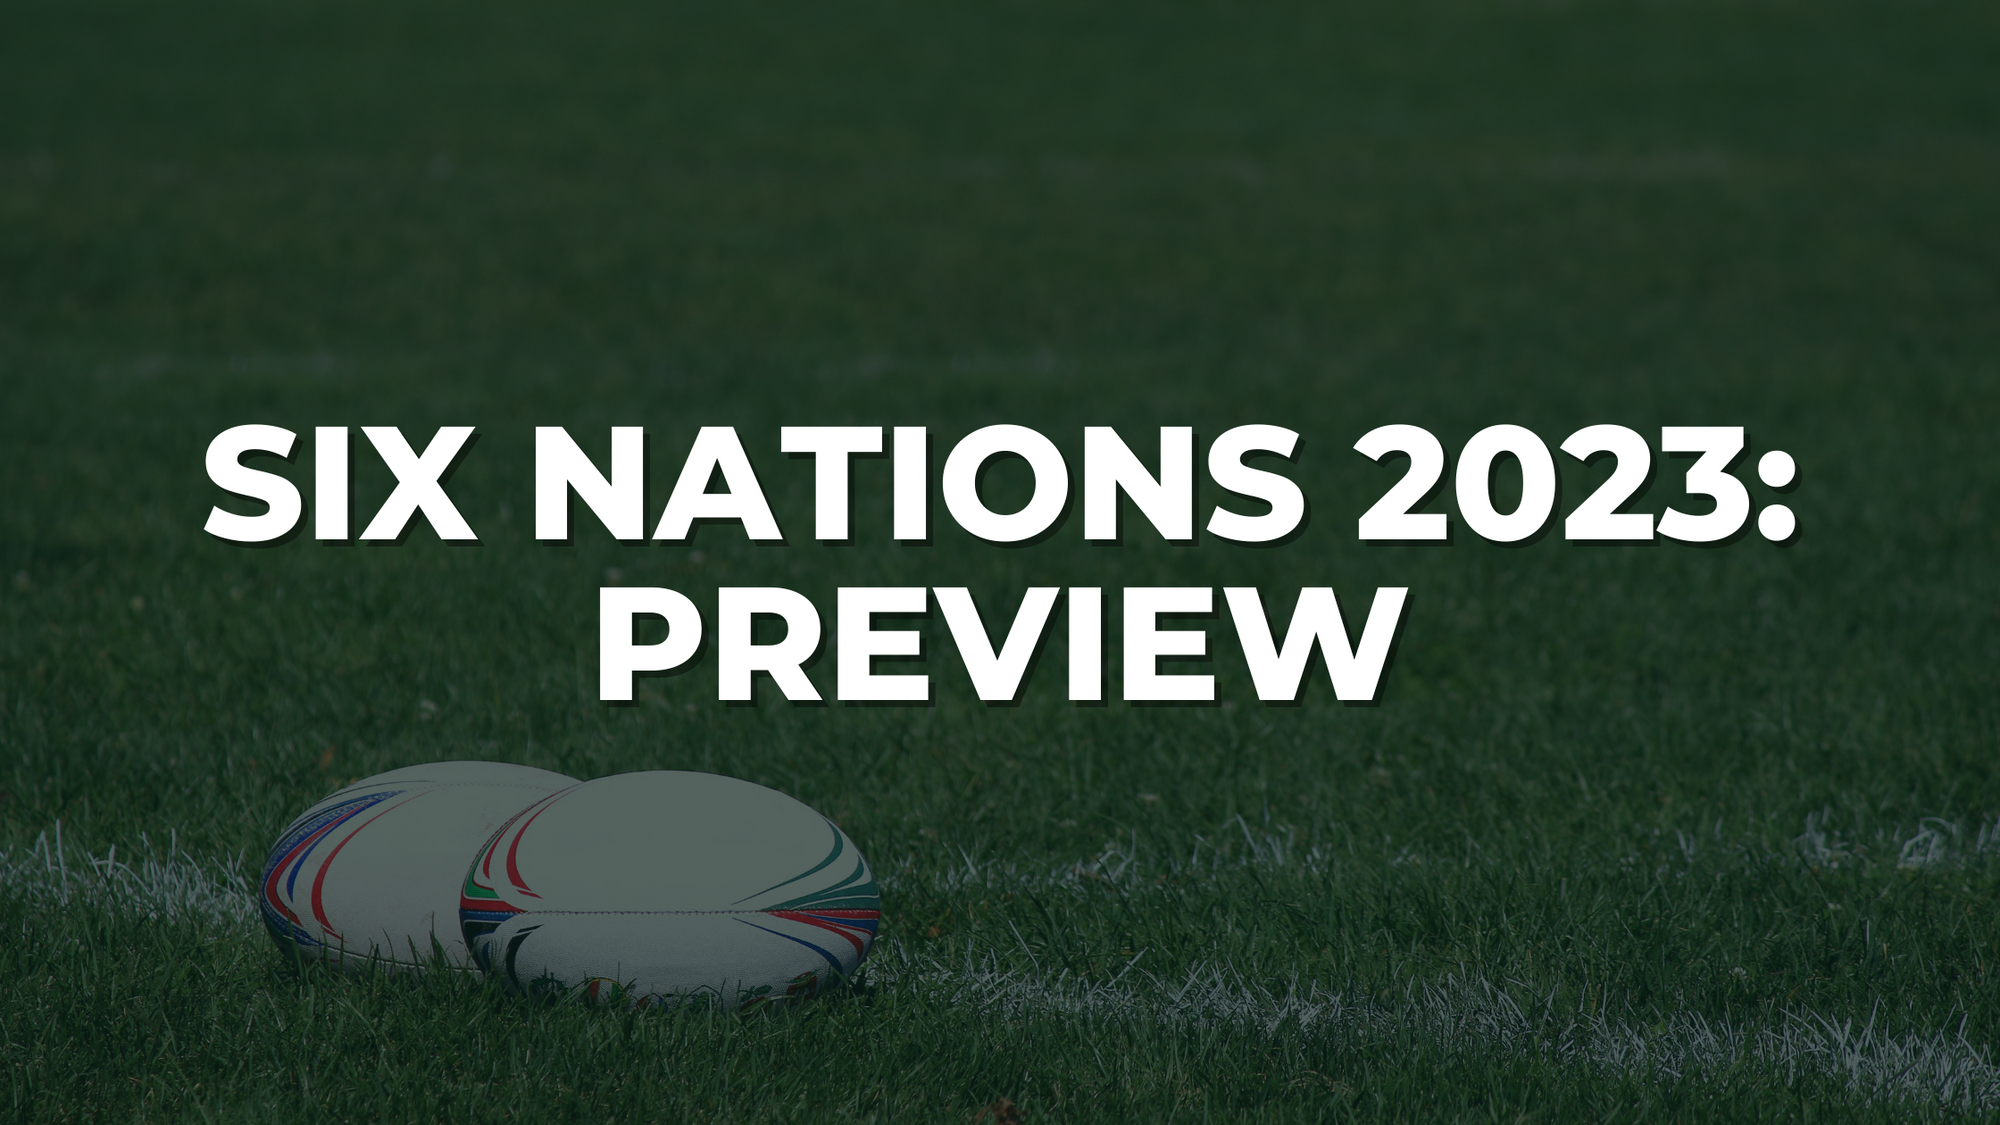 Six Nations 2023 Preview from a leading Wales Six nations hospitality provider